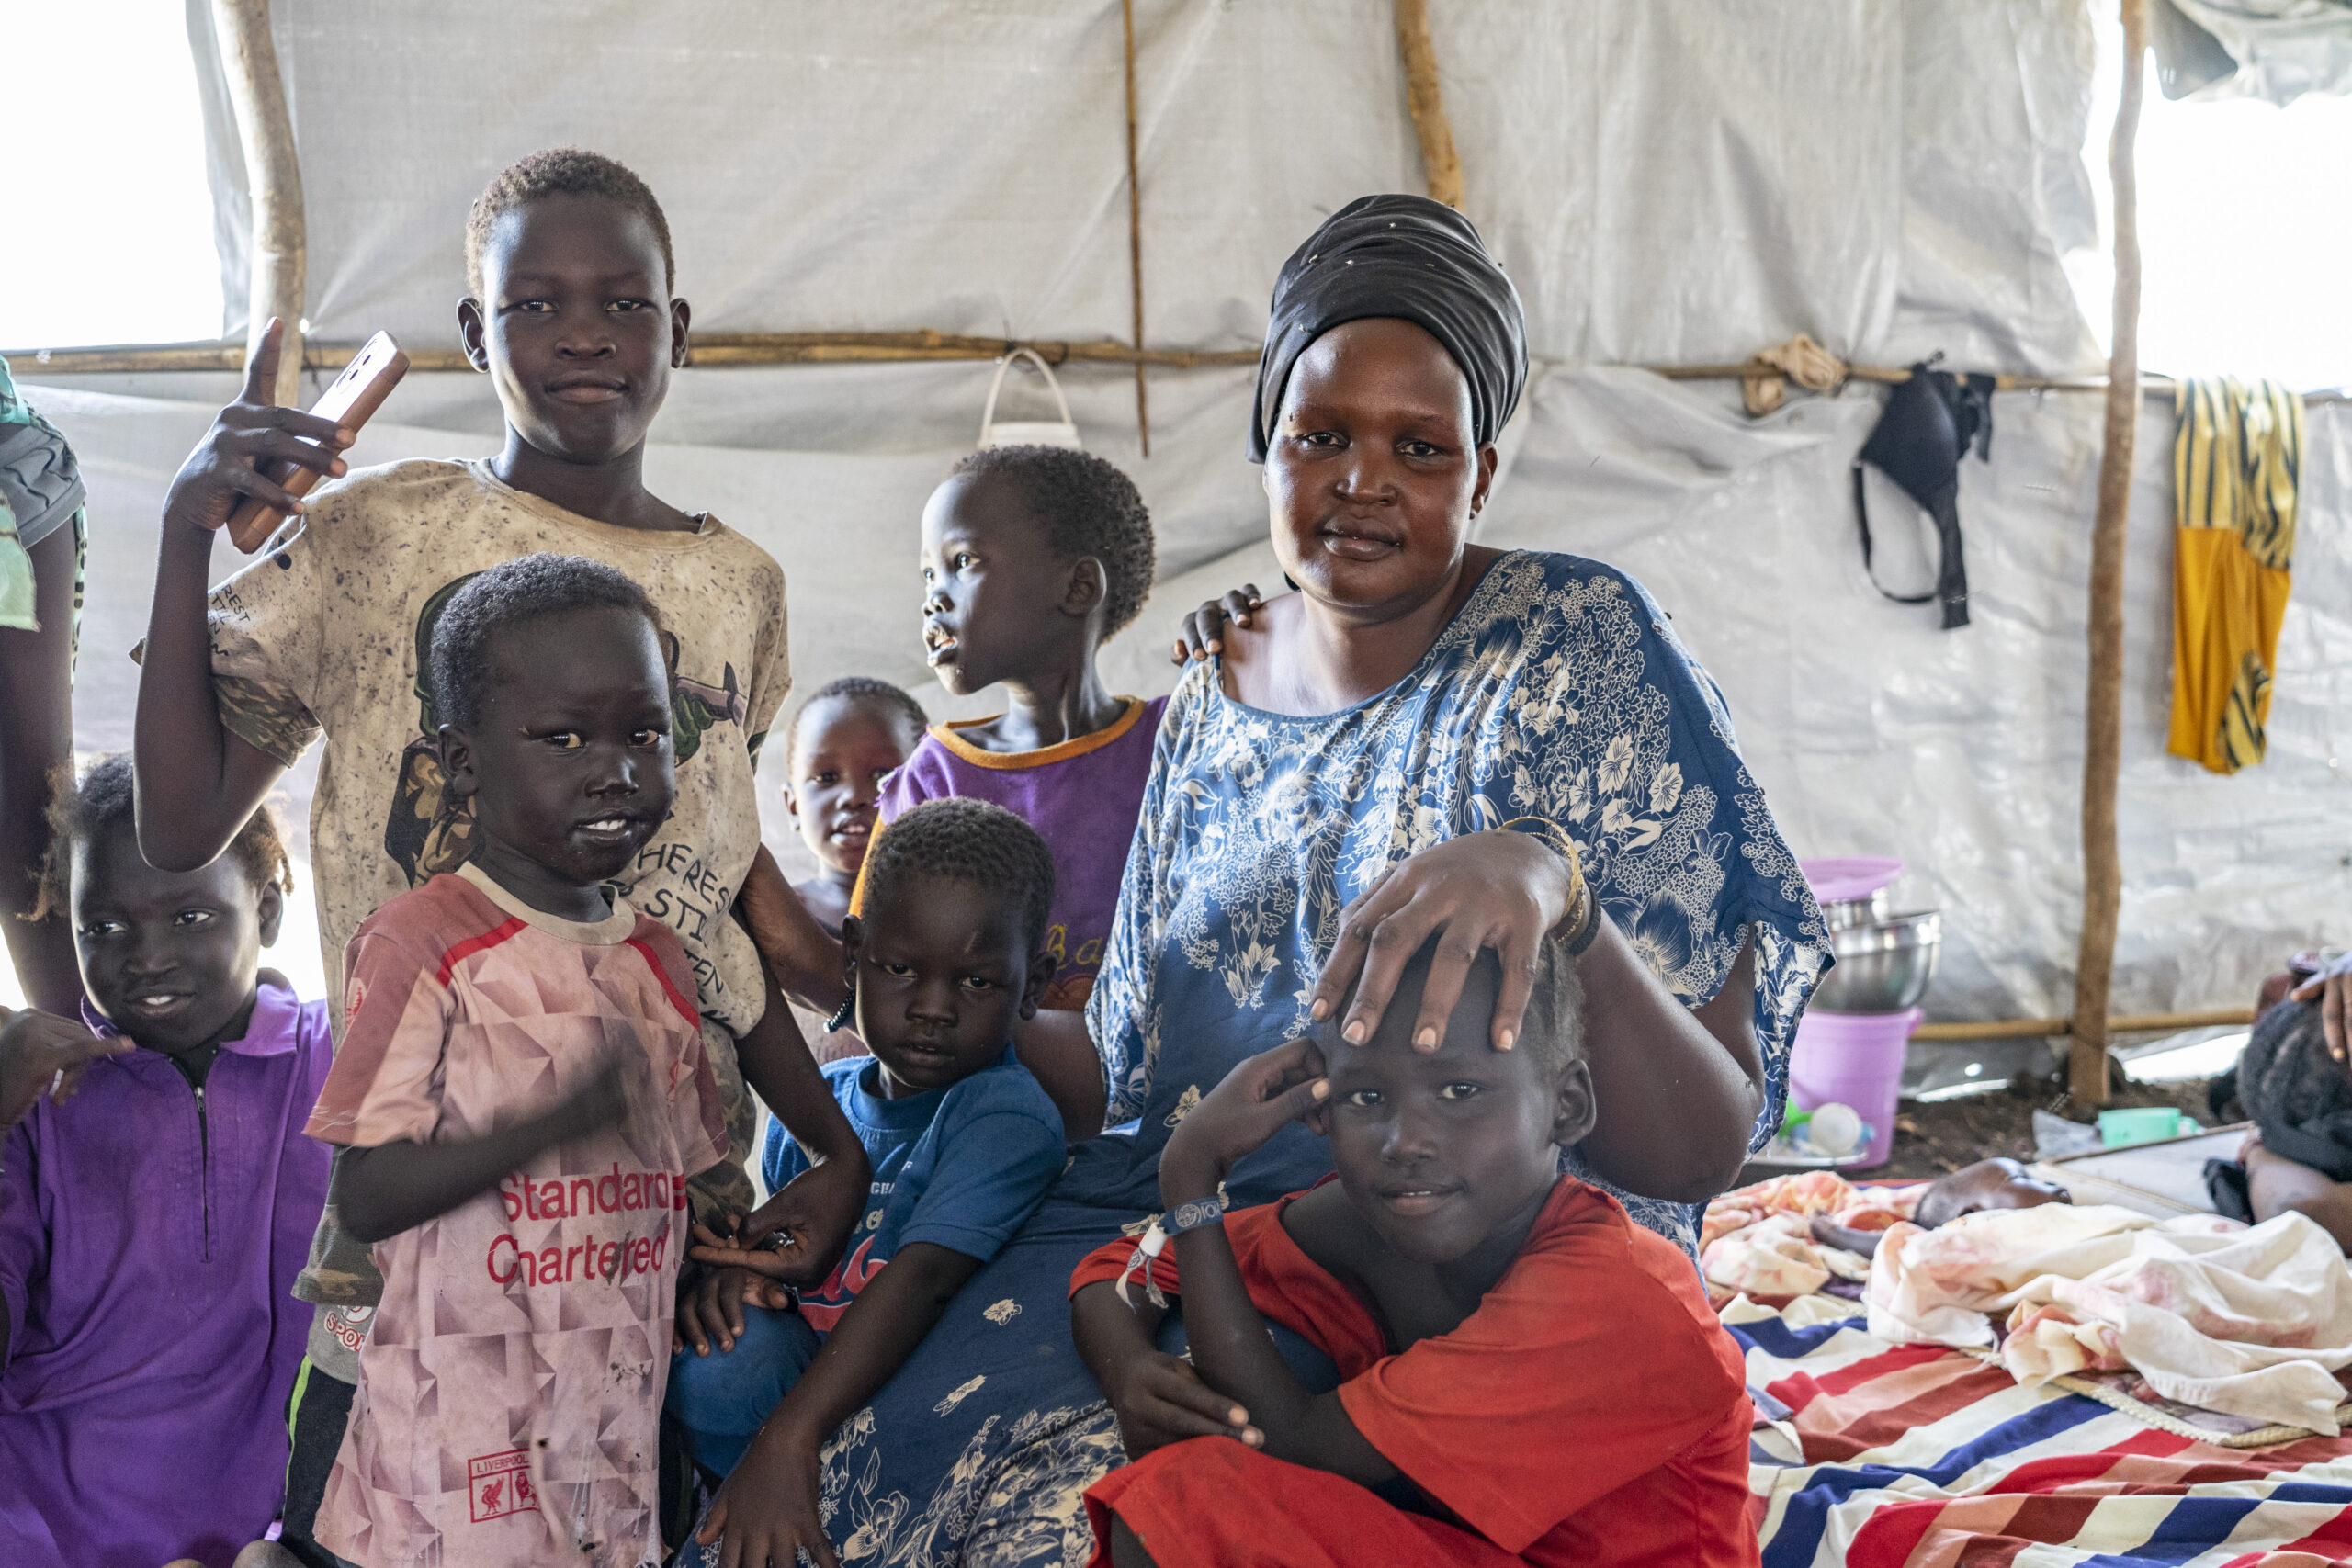 Batika, a refugee, poses for photo inside a tent in Renk with her children.